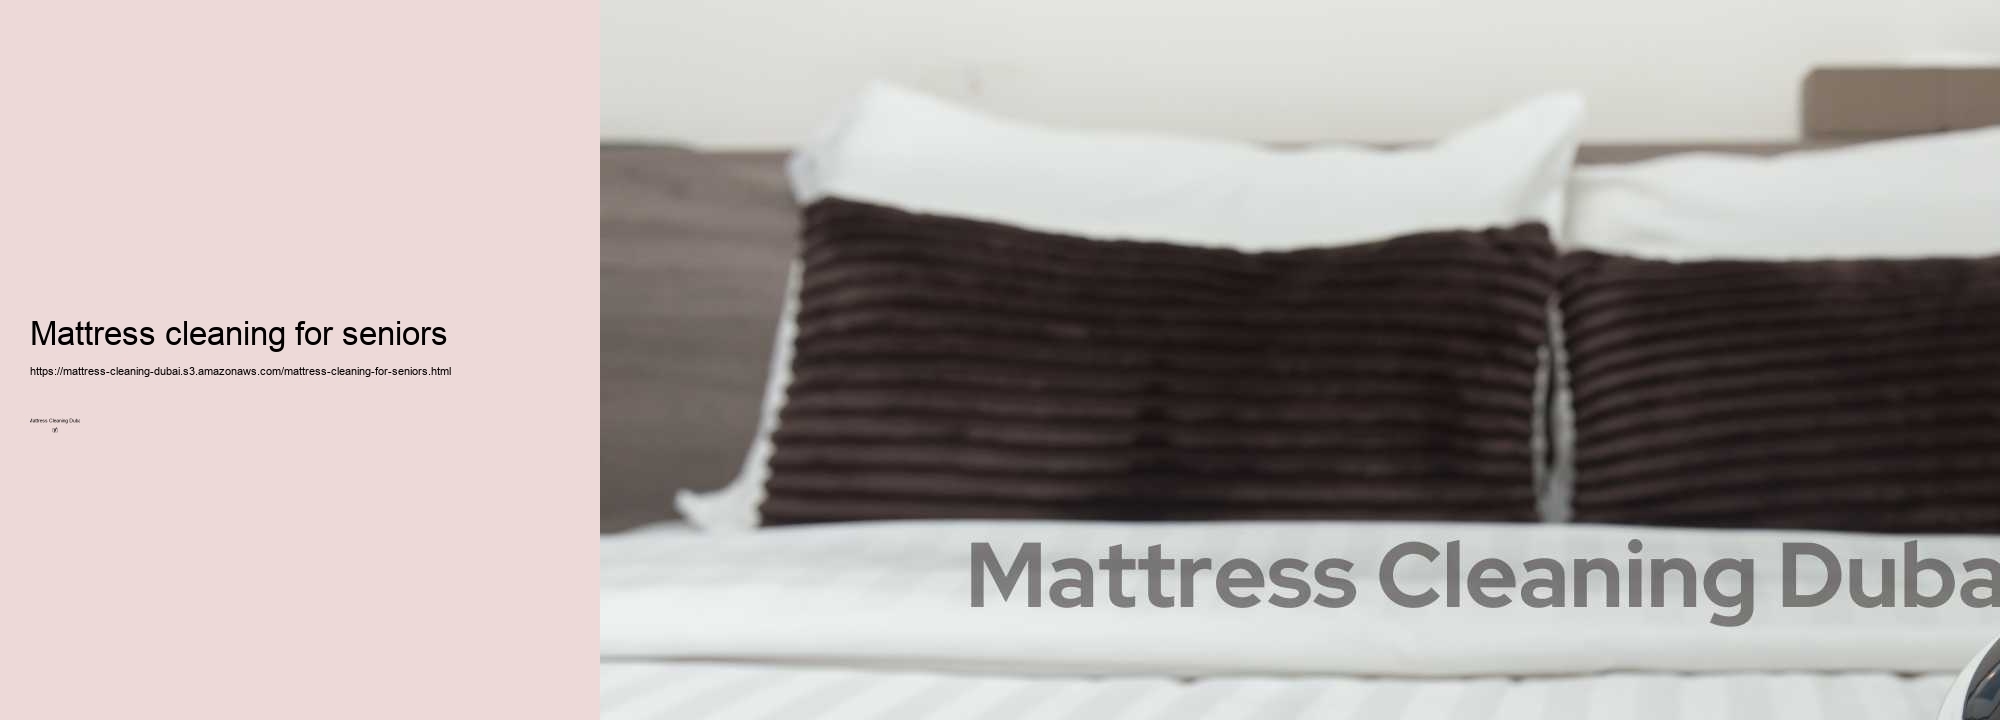 Mattress cleaning for seniors